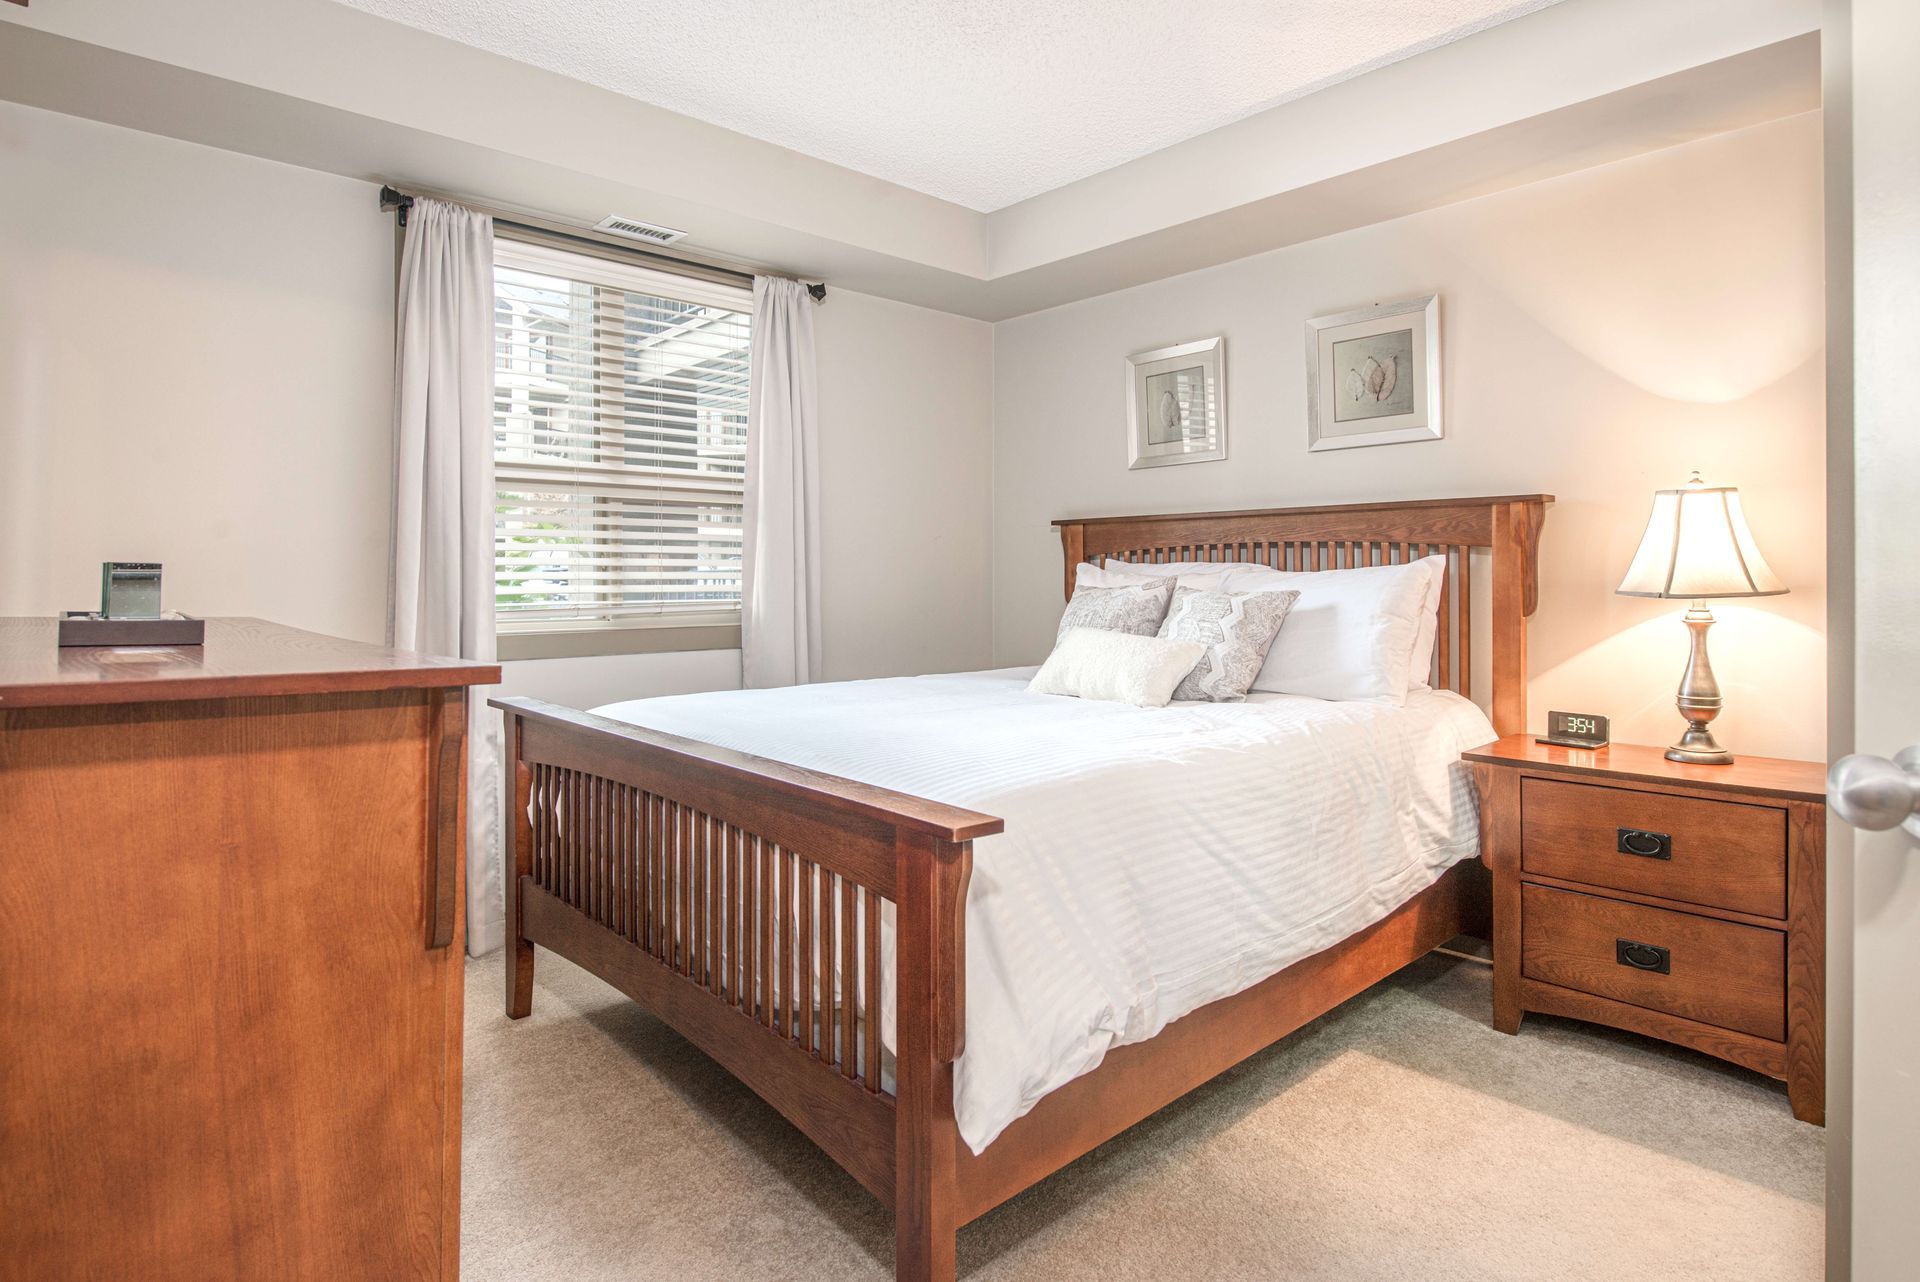 Primary bedroom at the Lake Windermere Pointe Condos in Invermere, BC managed by Aisling Baile Property Management